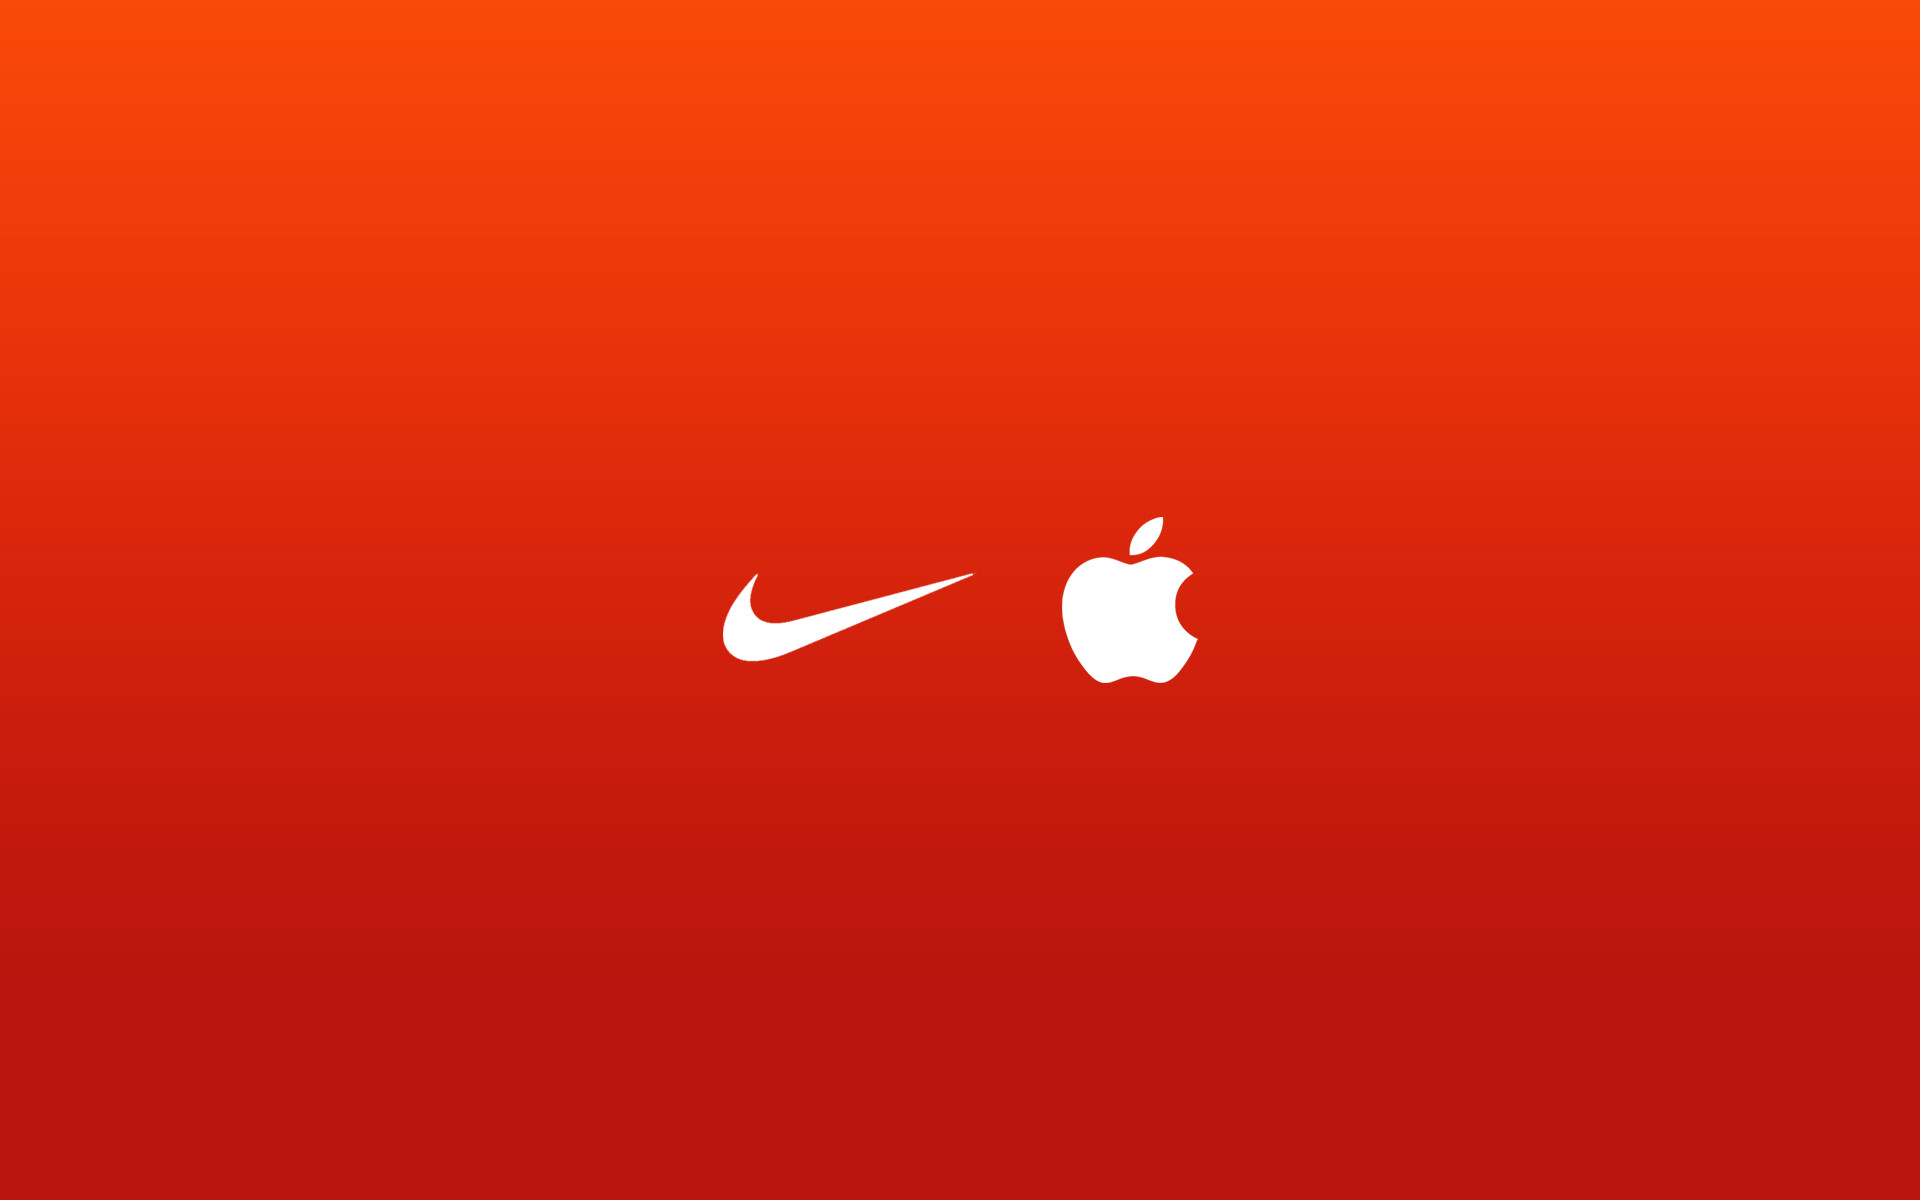 1920x1200 Nike + iPod Wallpaper - Gallery - Wallpapers For All